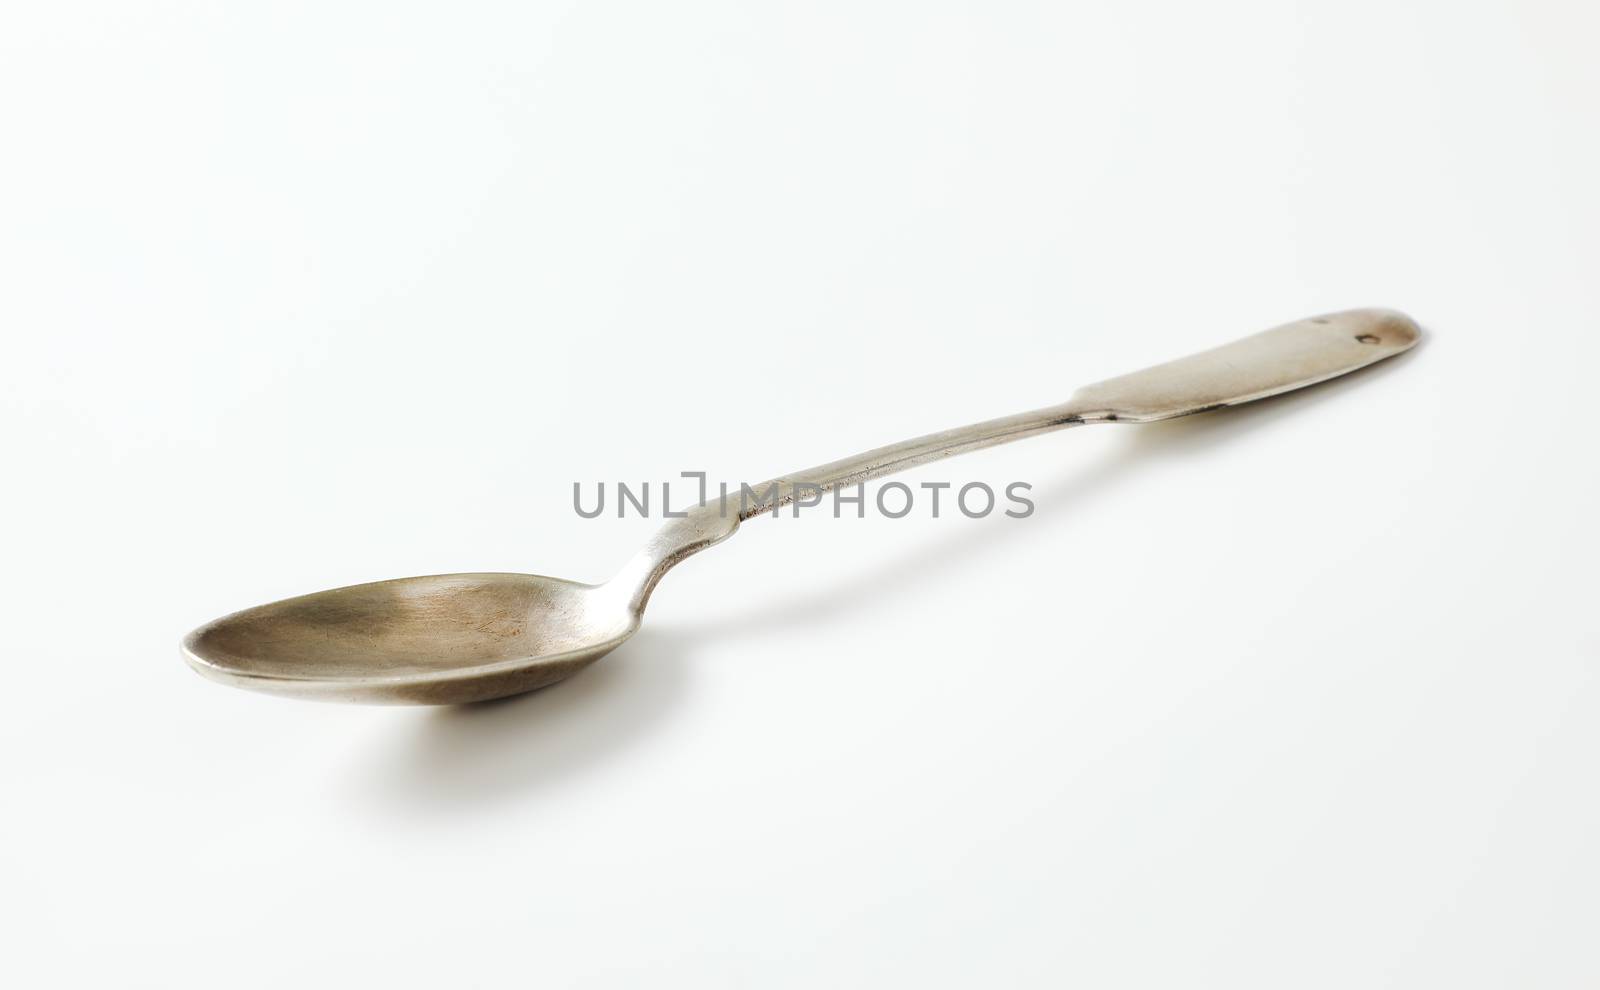 Small vintage coffee or dessert spoon by Digifoodstock